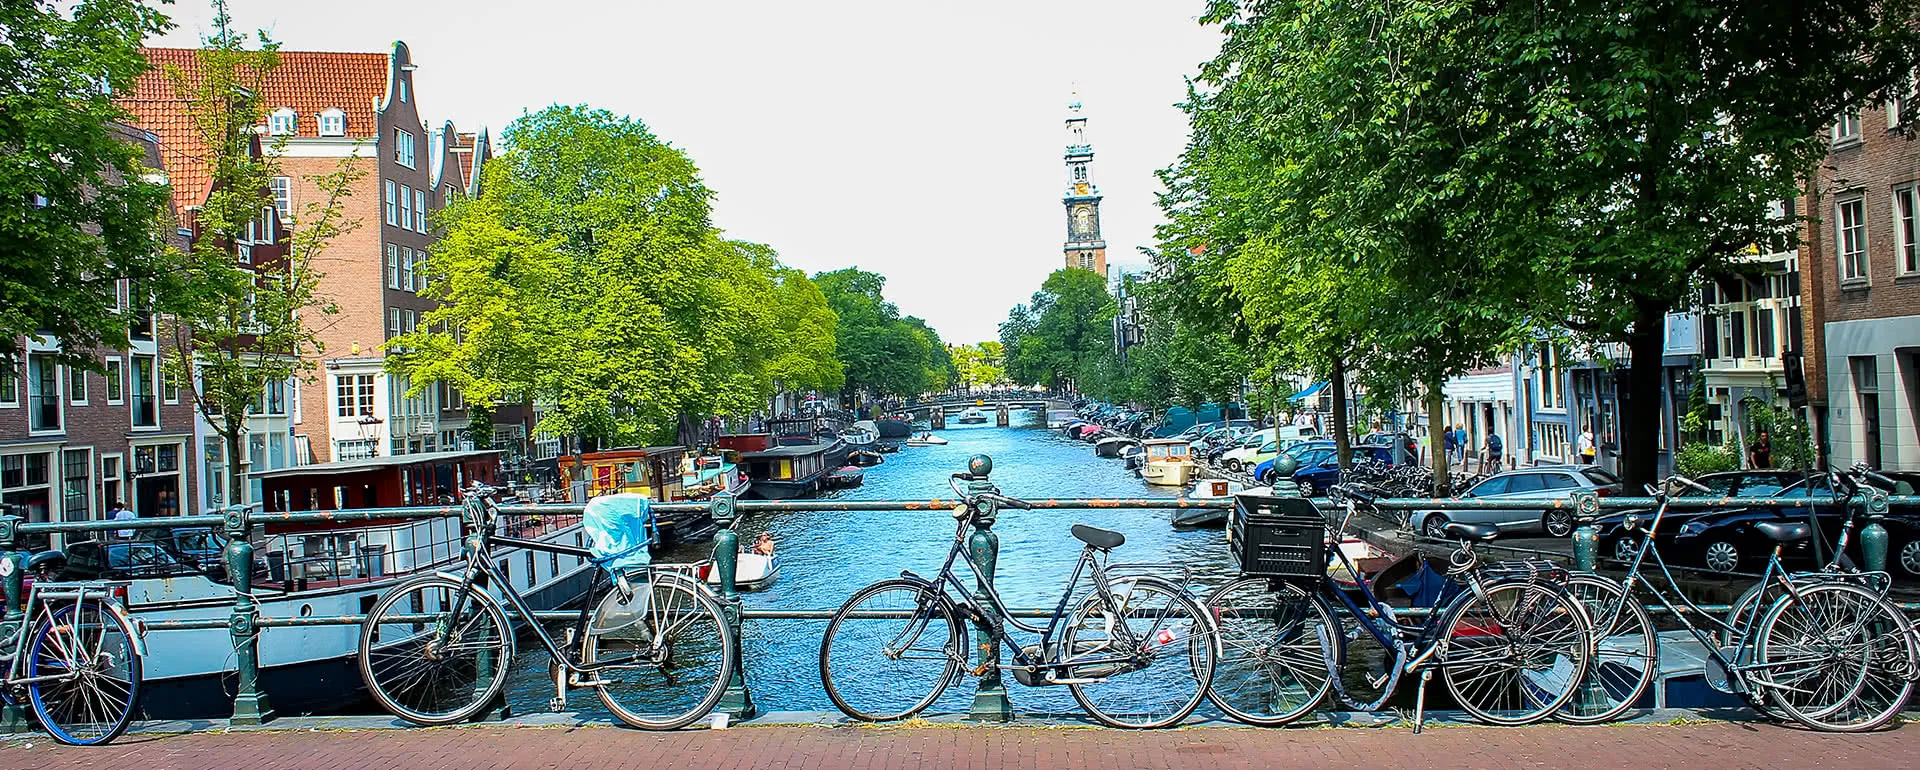 Utrecht - the destination with youth hostels